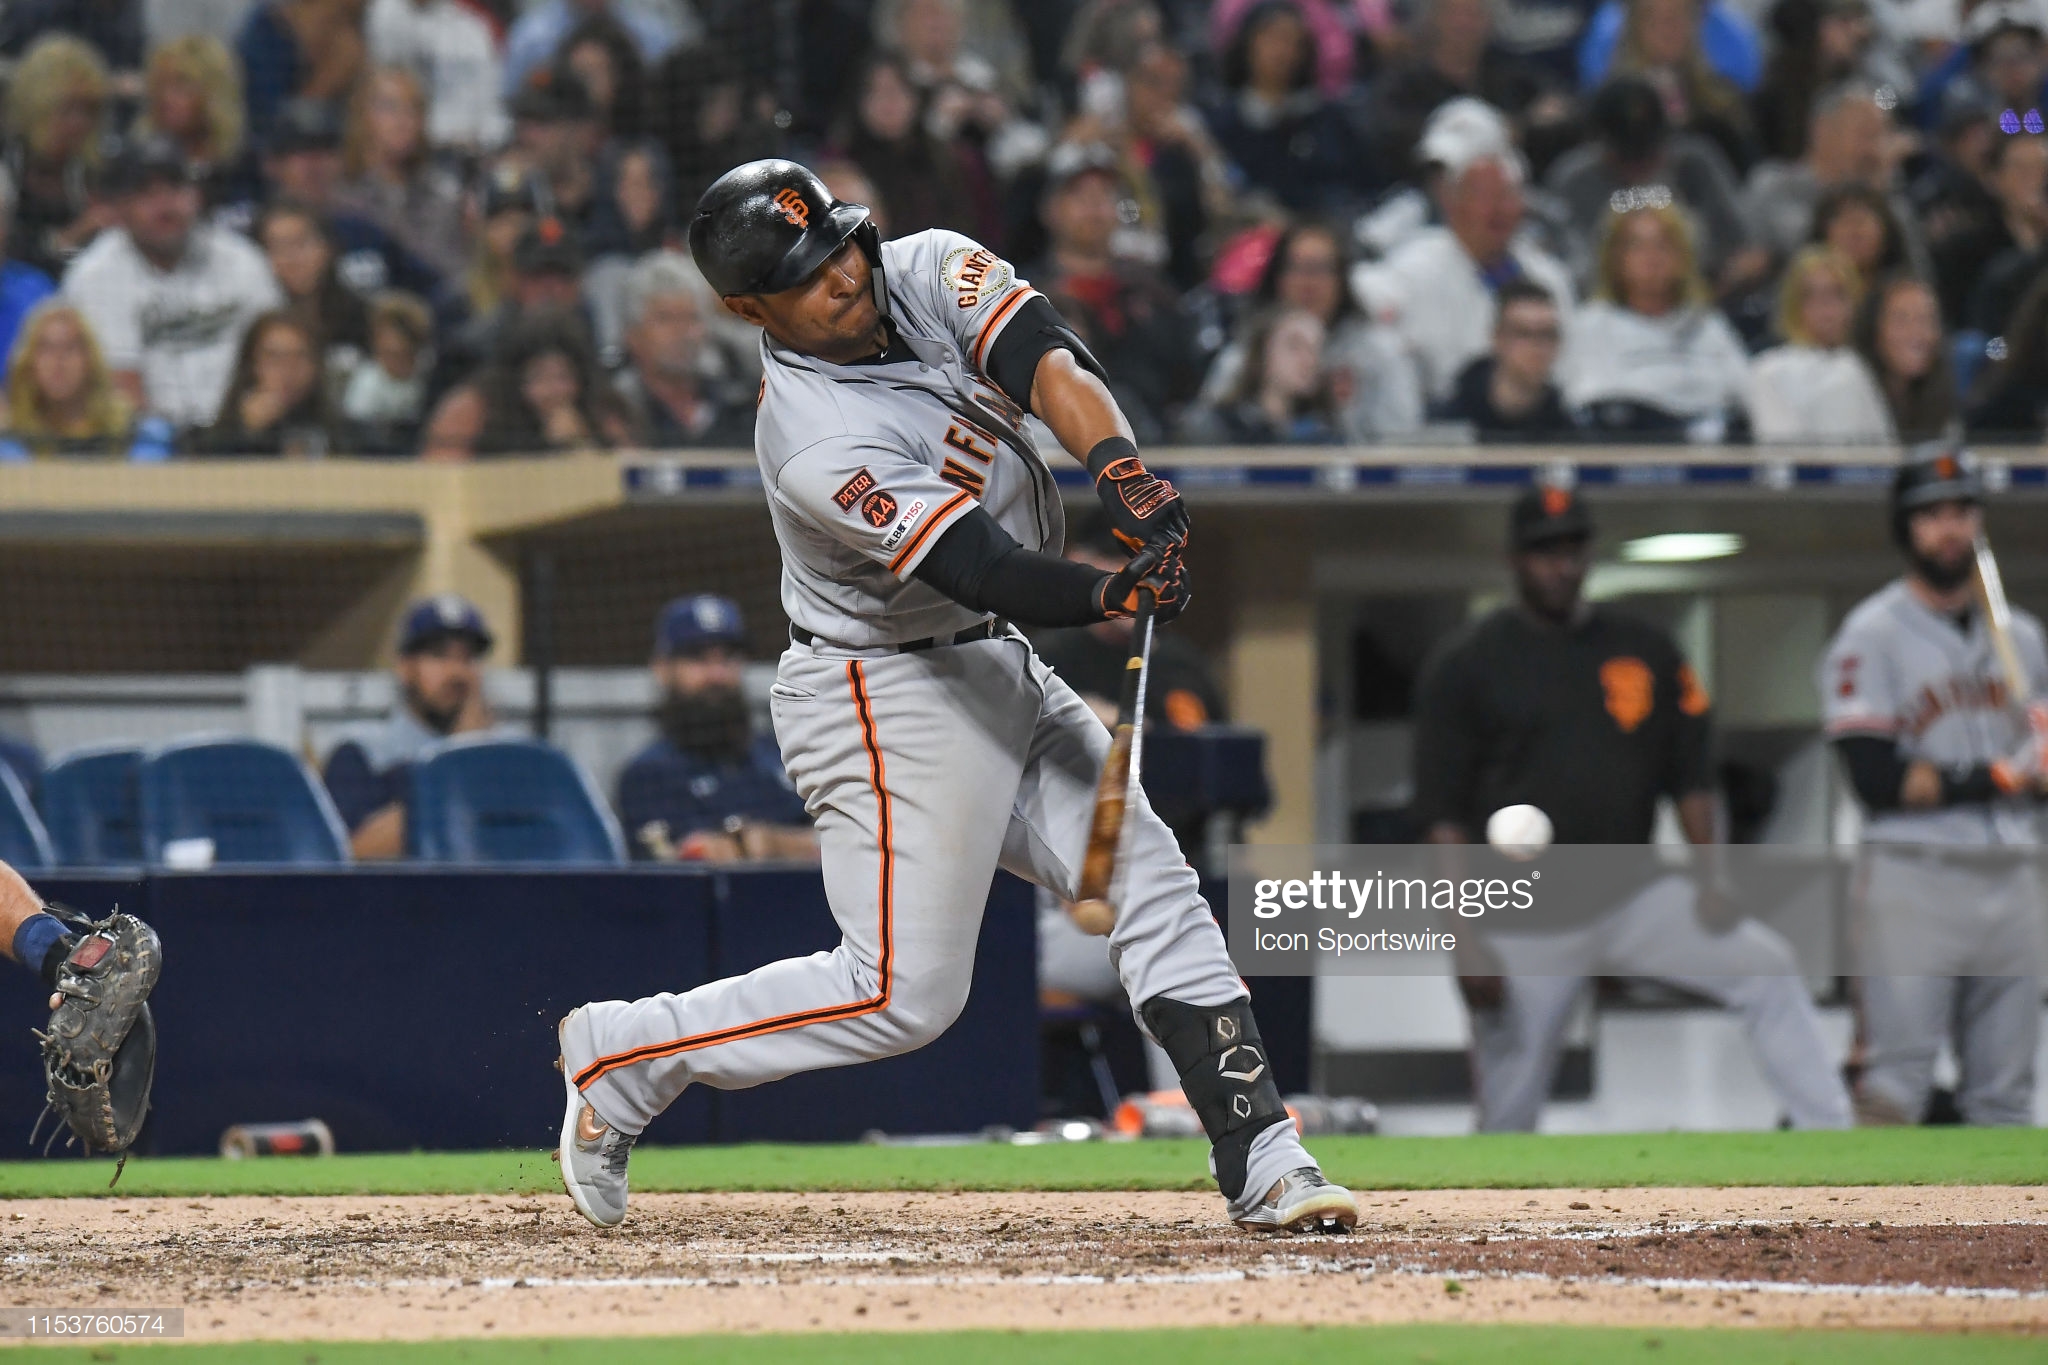 SAN DIEGO, CA - JULY 03: San Francisco Giants infielder Donovan Solano (7) hits a pitch during a MLB game between the San Francisco Giants and the San Diego Padres on July 03, 2019, at Petco Park in San Diego CA. (Photo by Justin Fine/Icon Sportswire via Getty Images)